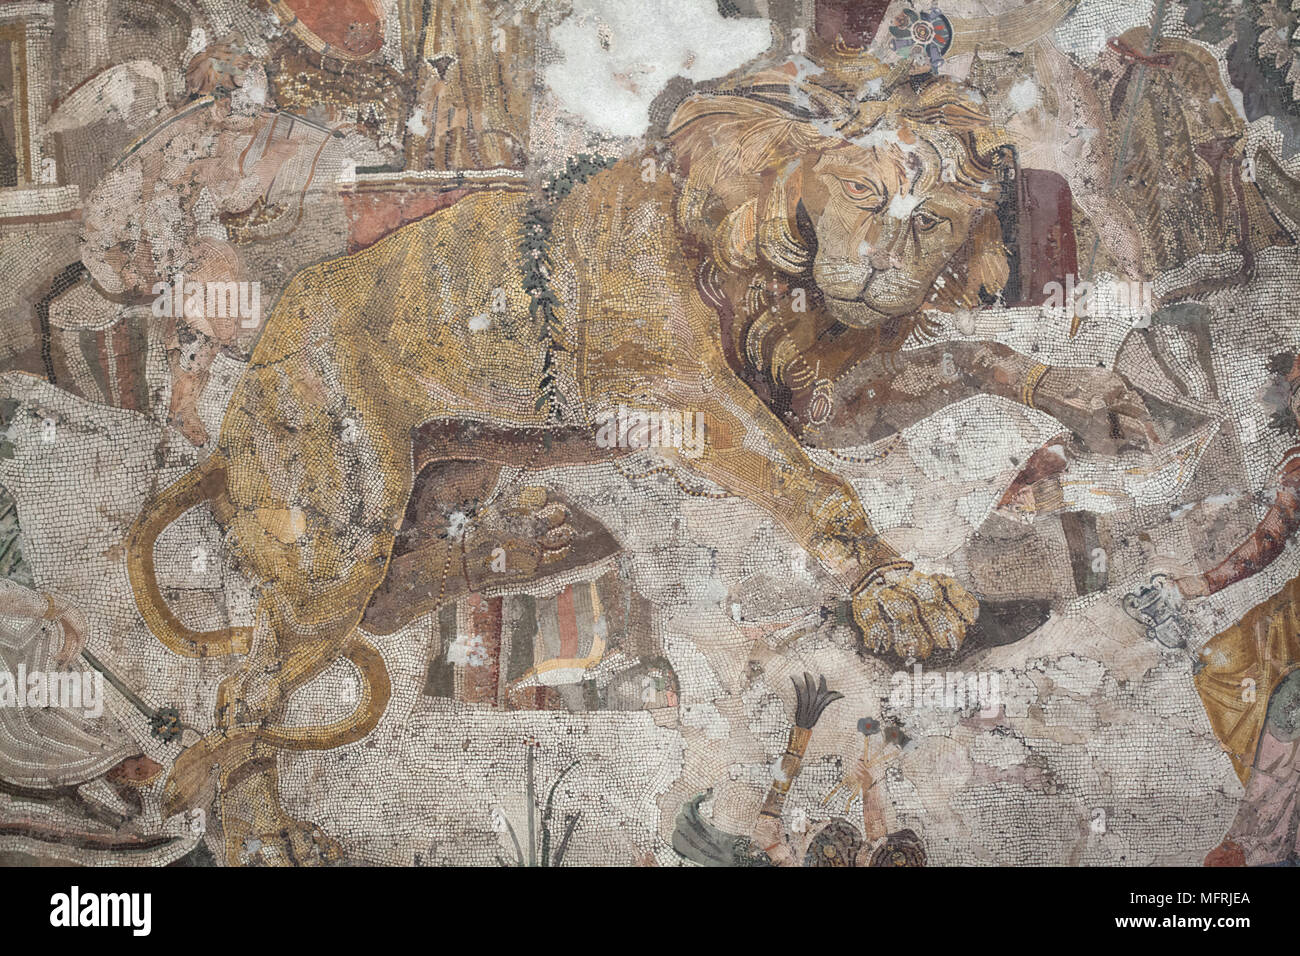 Lion and Cupid depicted in the Roman mosaic from Casa del Centauro (House of the Centaur) in Pompeii, now on display in the National Archaeological Museum (Museo Archeologico Nazionale di Napoli) in Naples, Campania, Italy. Stock Photo